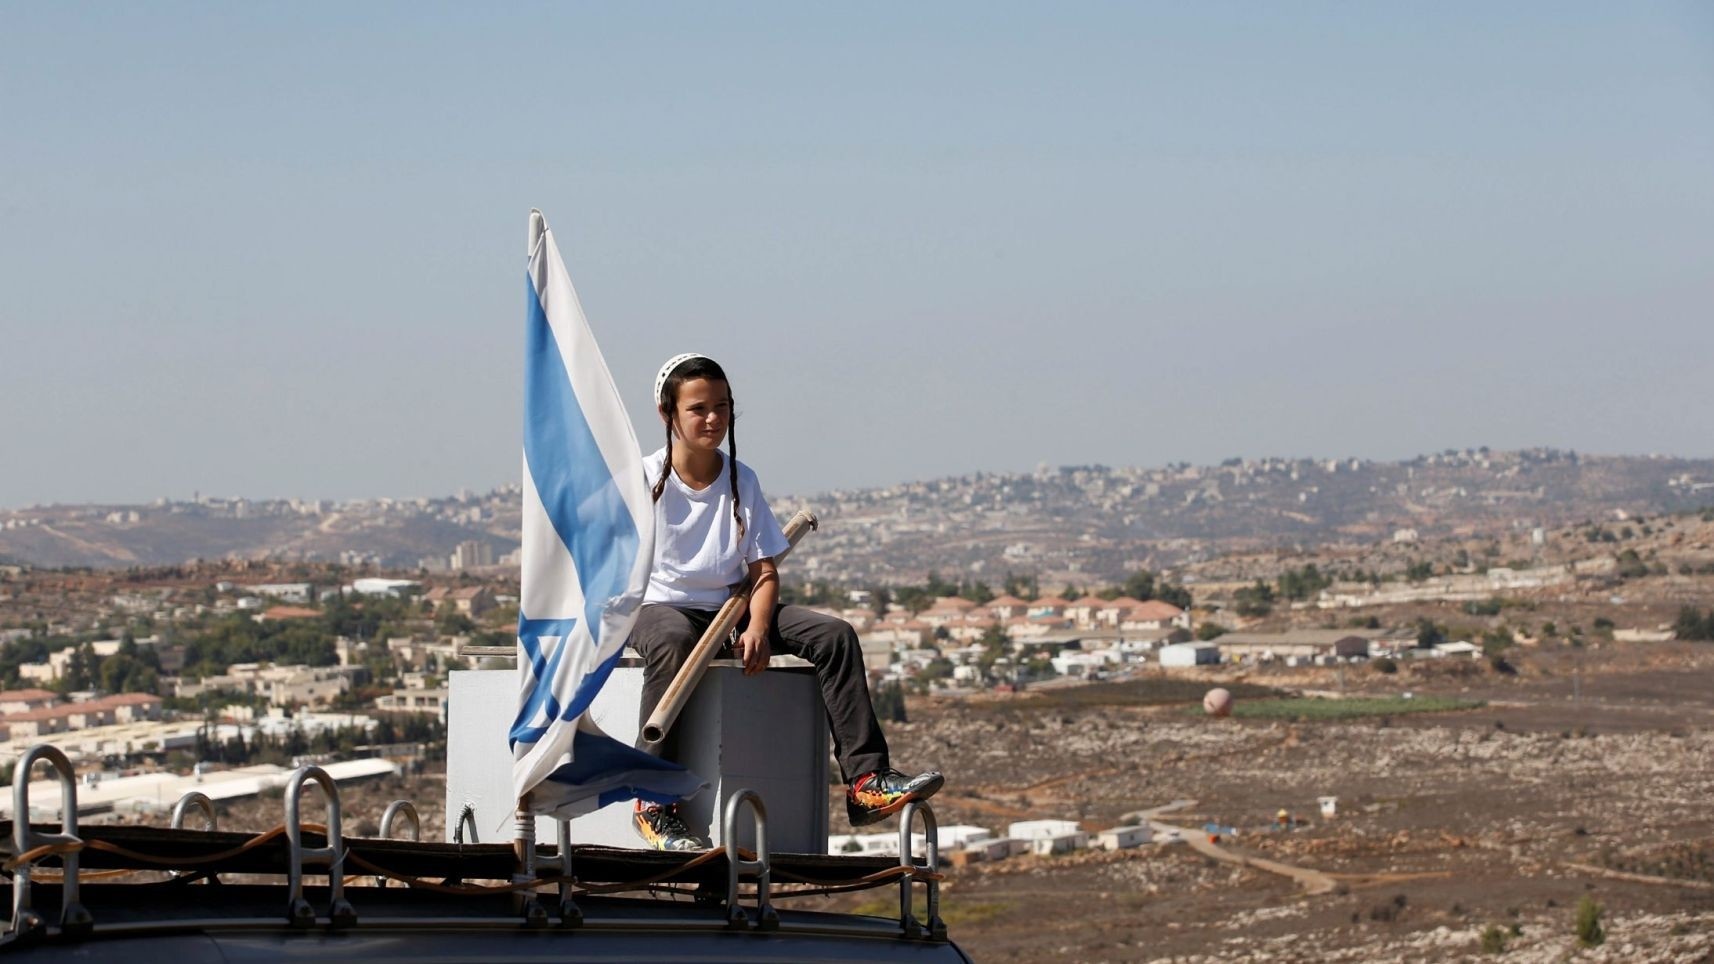 A boy sits on the roof of a vehicle at the entrance to the settler outpost of Amona in the West Bank (Reuters Photo)